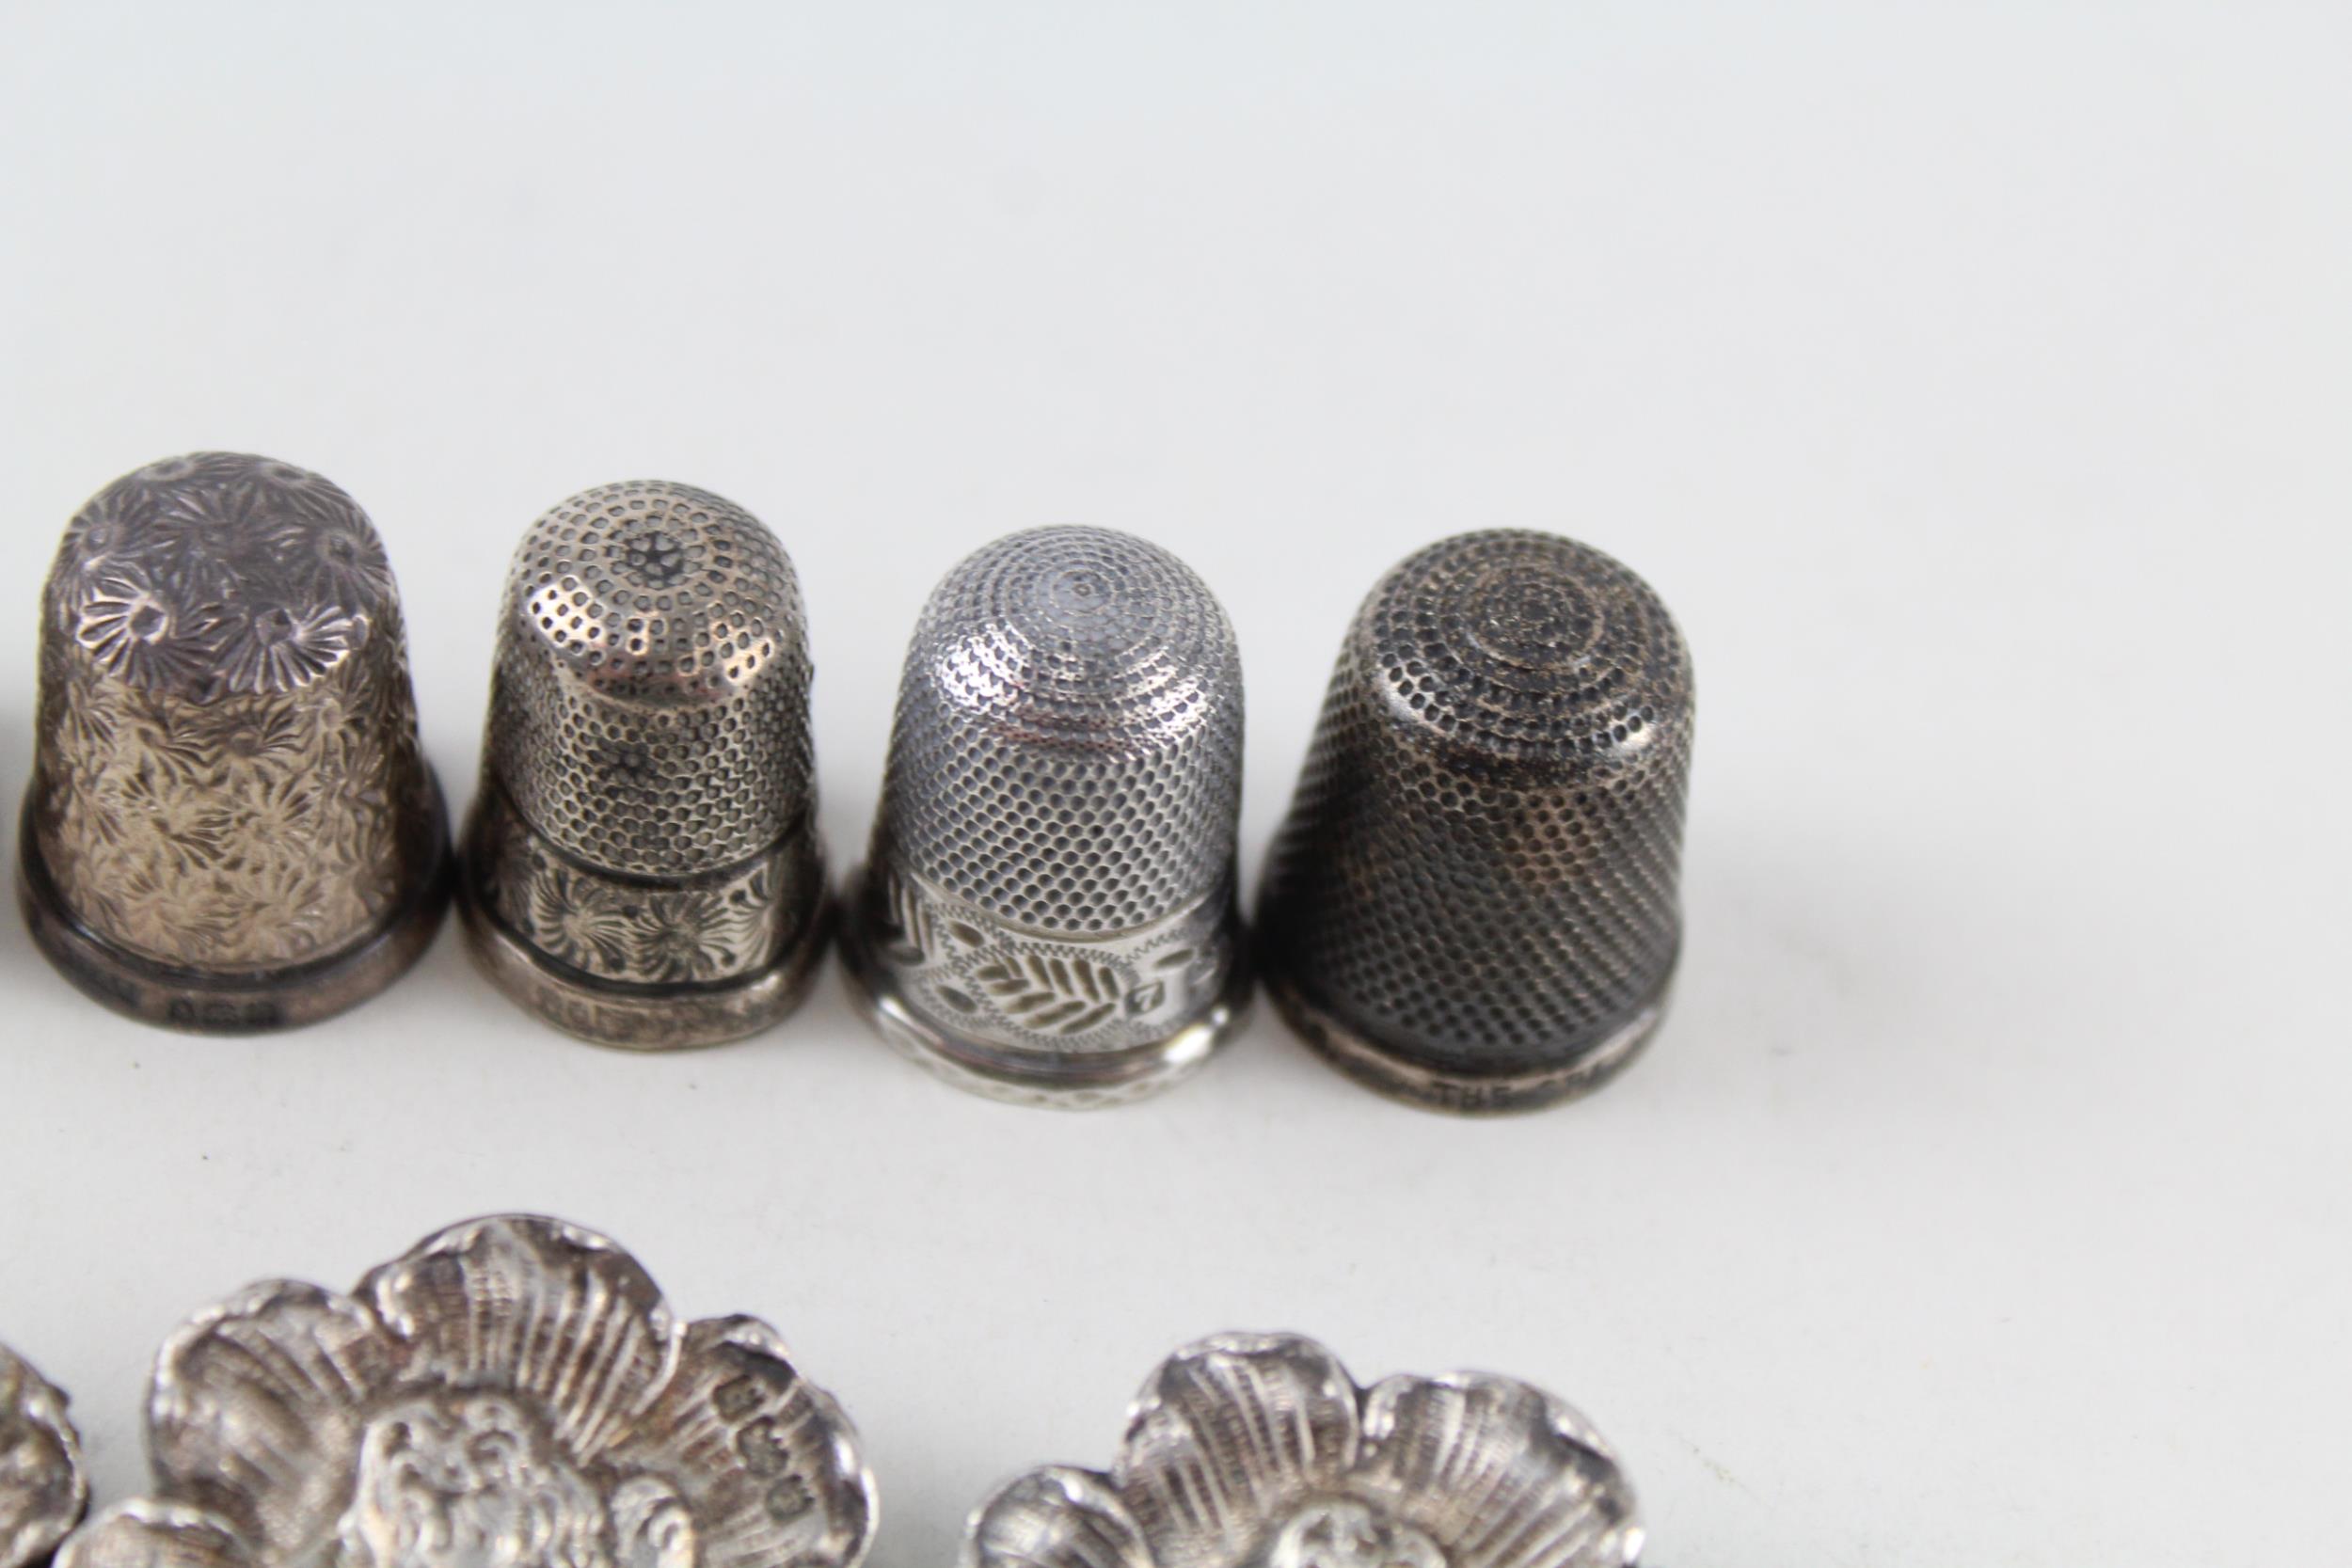 8 x Antique / Vintage Hallmarked .925 STERLING SILVER Thimbles & Buttons (49g) - Inc Charles Horner, - Image 5 of 5